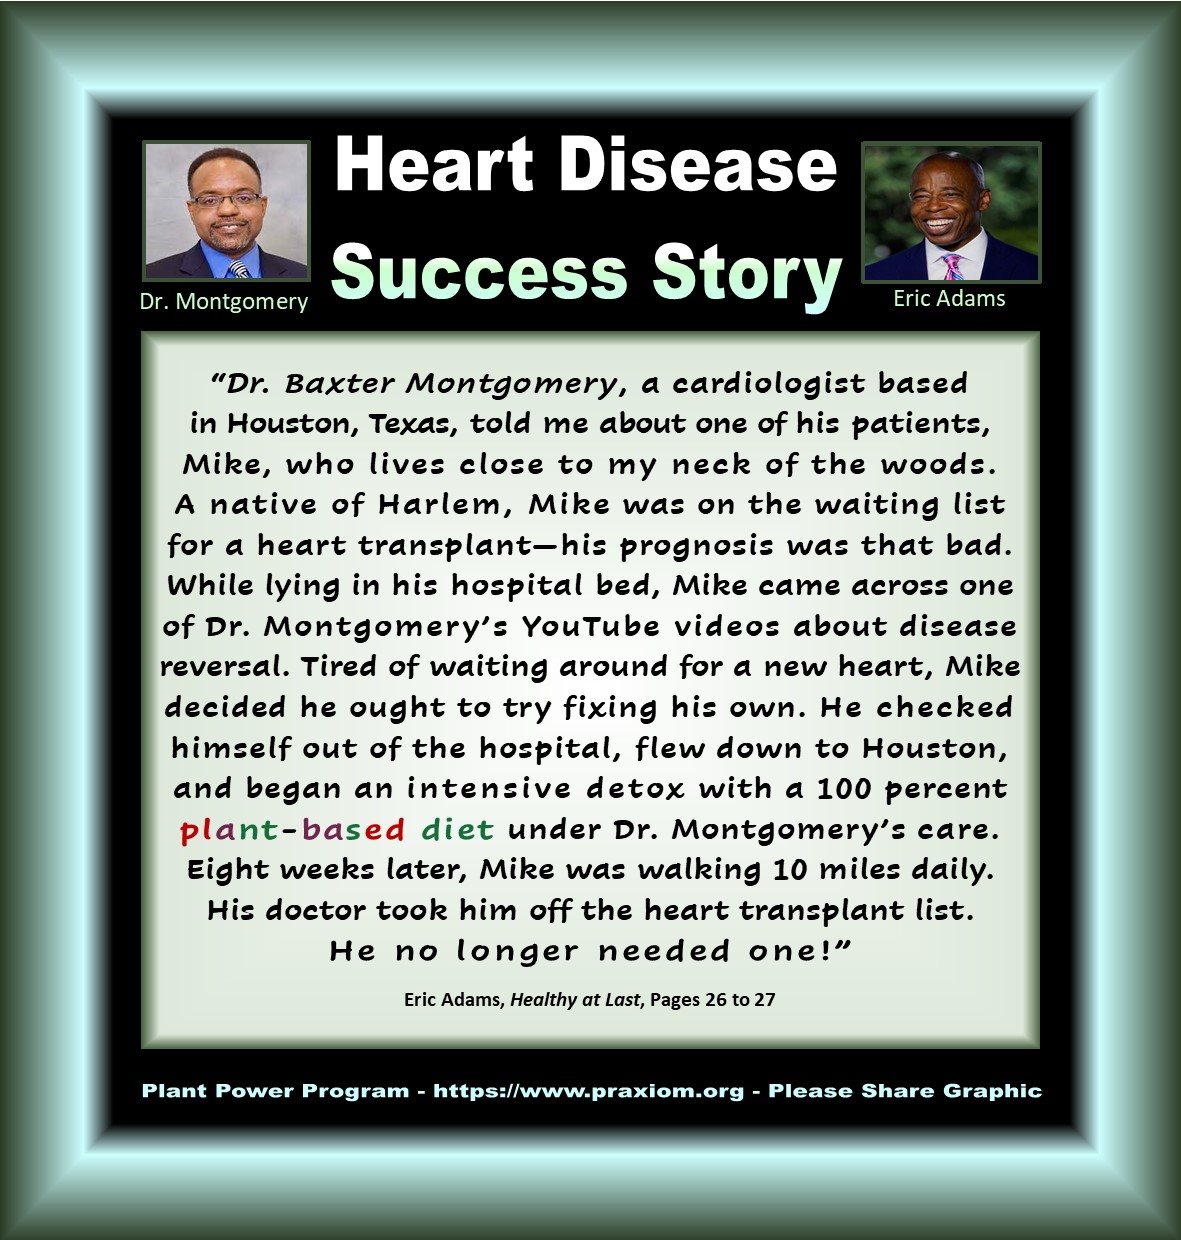 Heart Disease Success Story - Dr. Baxter Montgomery reported by Eric Adams